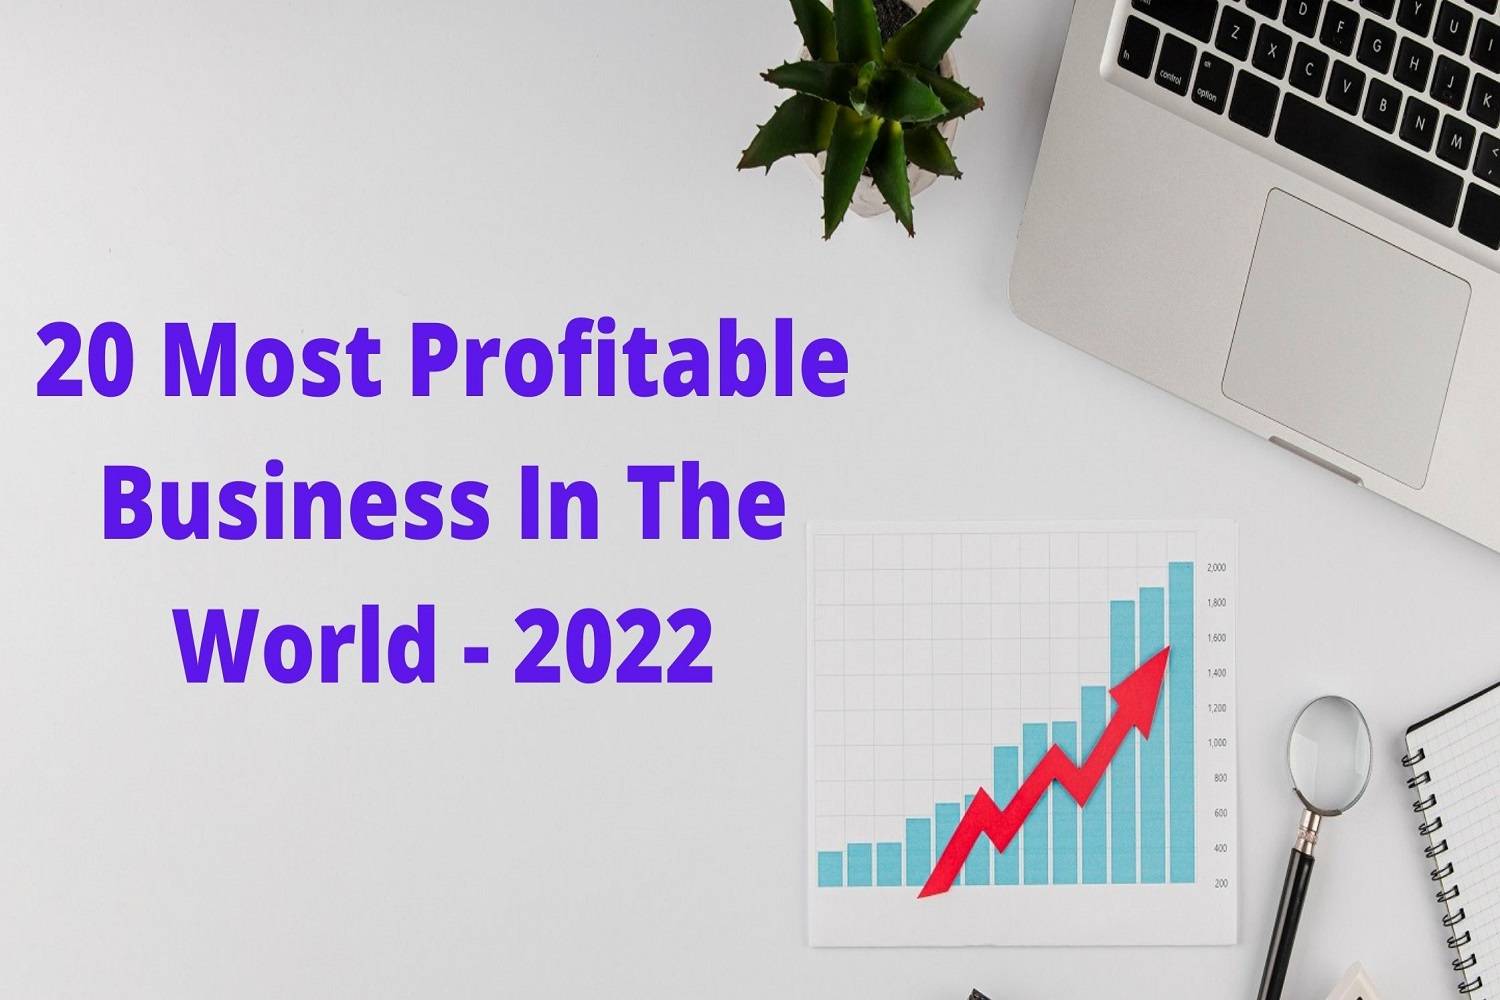 20 Most Profitable Business In The World - 2022 | Abdul Ehsan | Entrepreneur and Digital Marketing Consultant in Sri Lanka